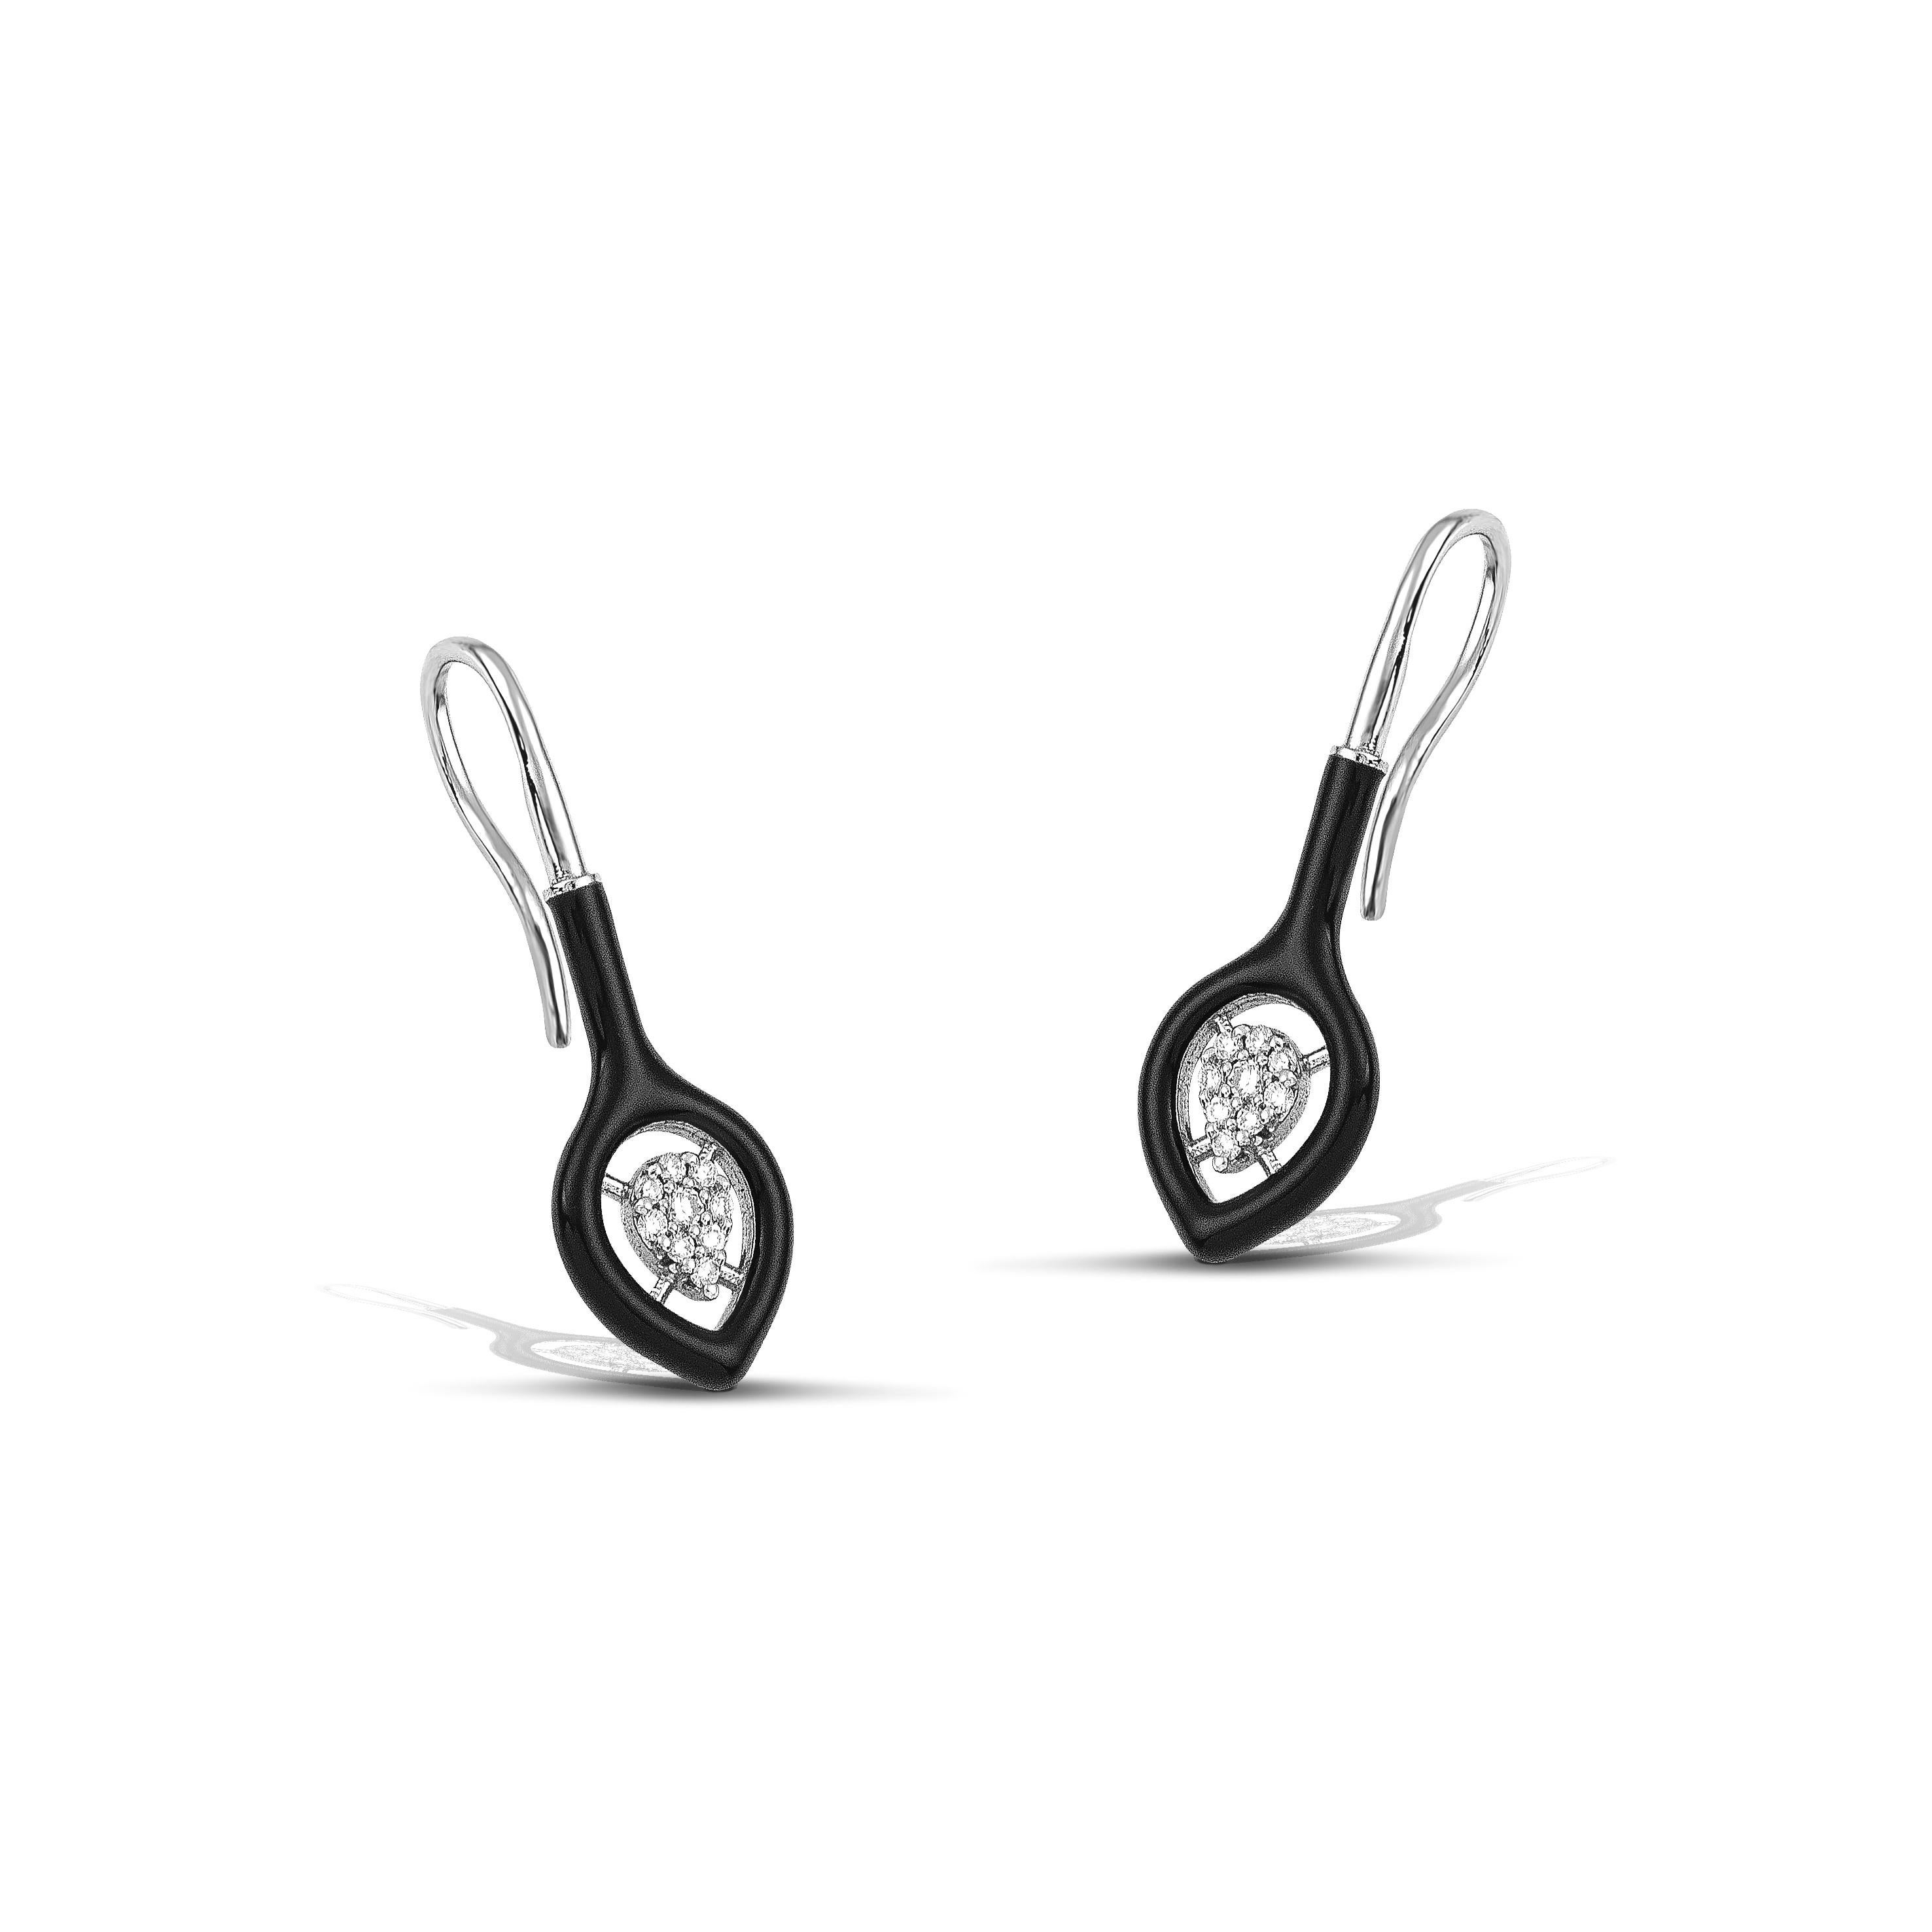 14K gold diamond earrings with a classic black colour accent, the perfect gift for yourself or a loved one.
100% Recycled 14 K White Gold
Diamonds
Black Enamel
Size: 3cm/1,18 inches
Inspiration: In the arts, maximalism, a reaction against